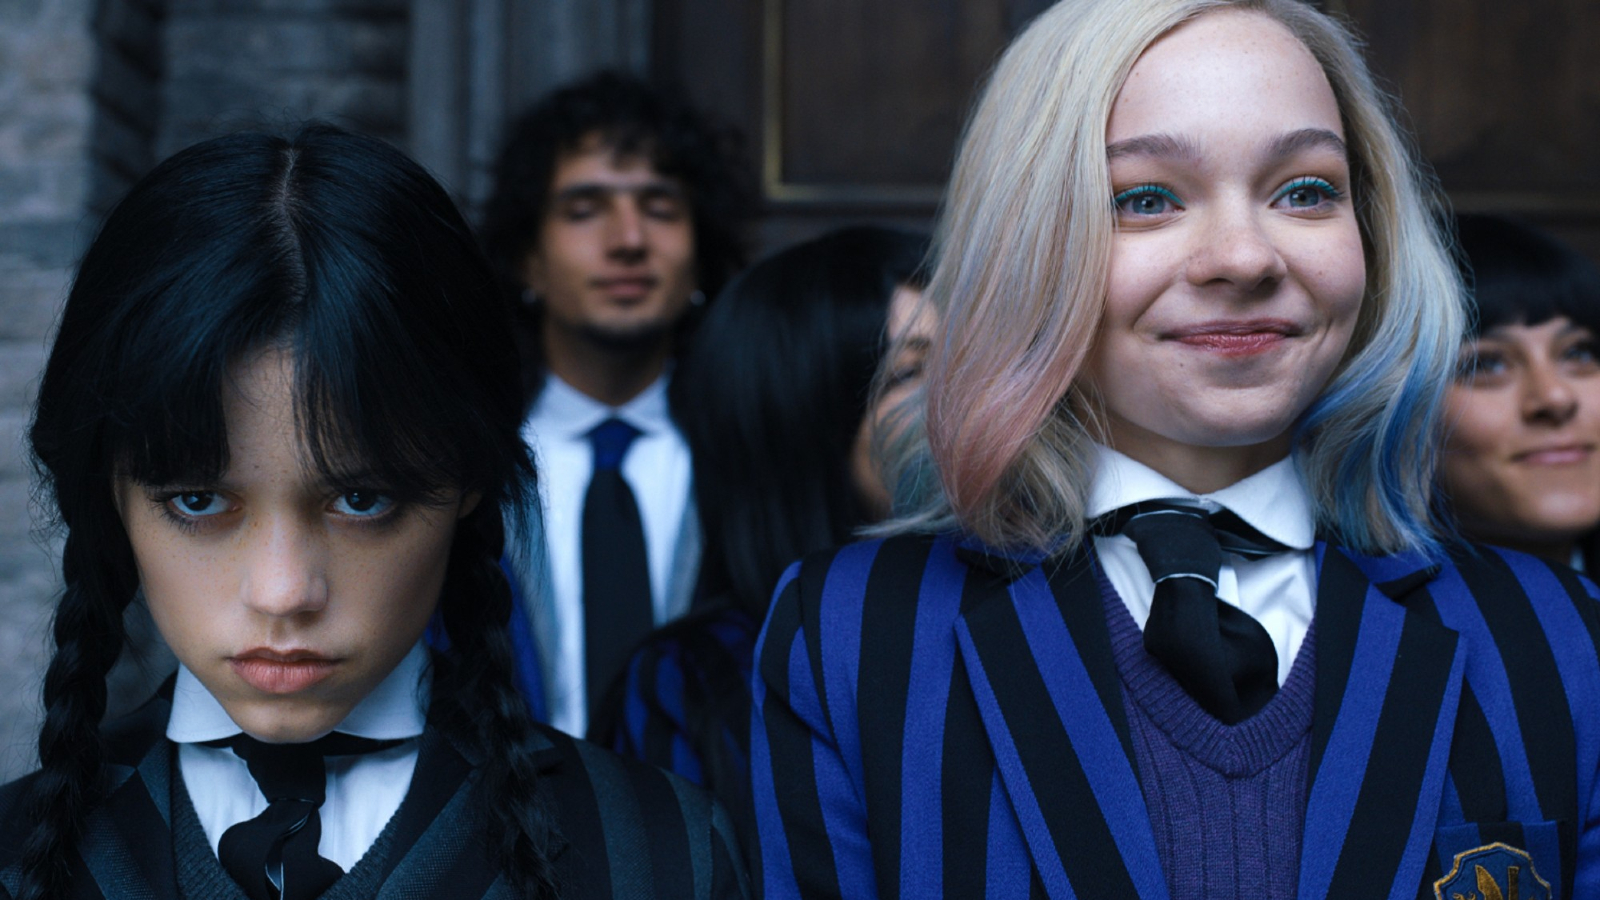 Enid Sinclair from Wednesday is smiling next to Wednesday Addams.